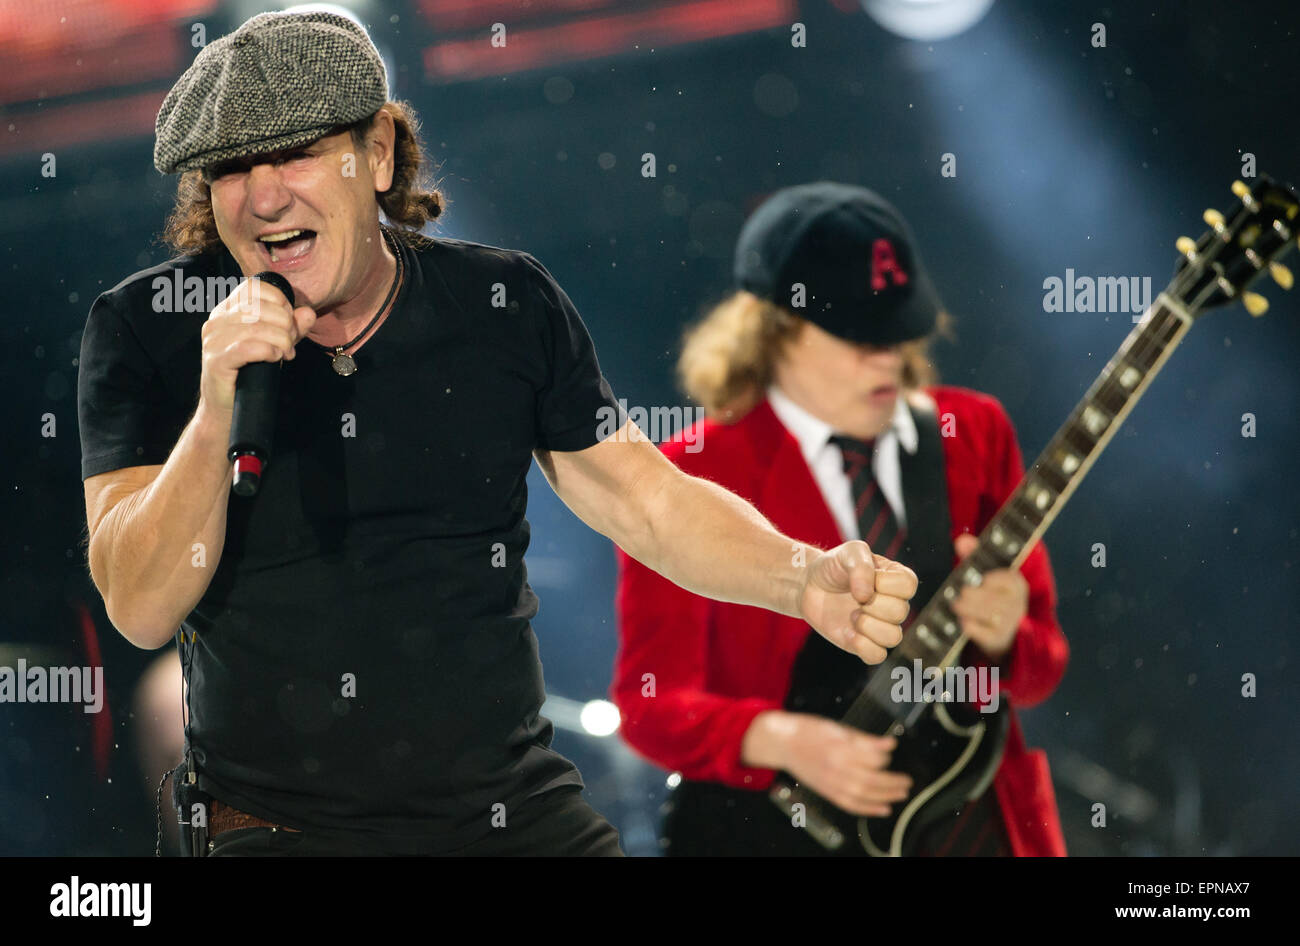 Munich, Germany. 19th May, 2015. The singer, Brian Johnson (L), and the guitarist, Angus Young, in the Australian rock band AC/DC stand on stage in the Olympic Stadium in Munich, Germany, 19 May 2015. Photo: SVEN HOPPE/dpa/Alamy Live News Stock Photo